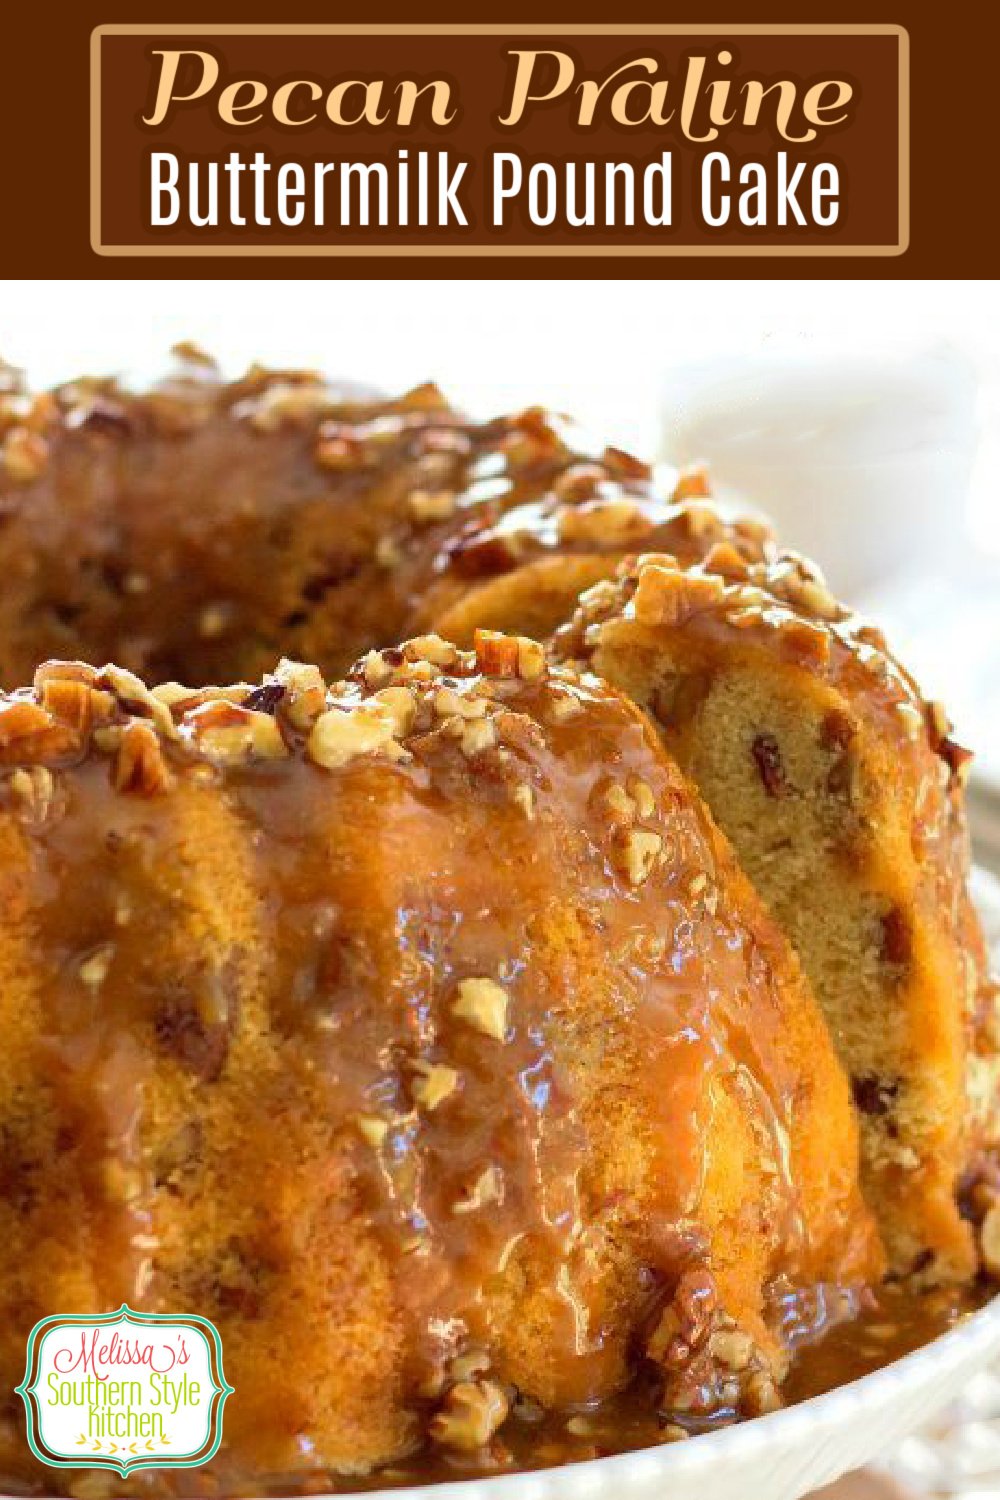 This buttery Pecan Praline Buttermilk Pound Cake is filled with toasted pecans and toffee bits then drizzled with a sweet pecan praline glaze #pralinepoundcake #pralinepecans #poundcakerecipes #pralines #cakes #cakerecipes #desserts #dessertfoodrecipes #holidaybaking #southernfood #southernrecipes via @melissasssk